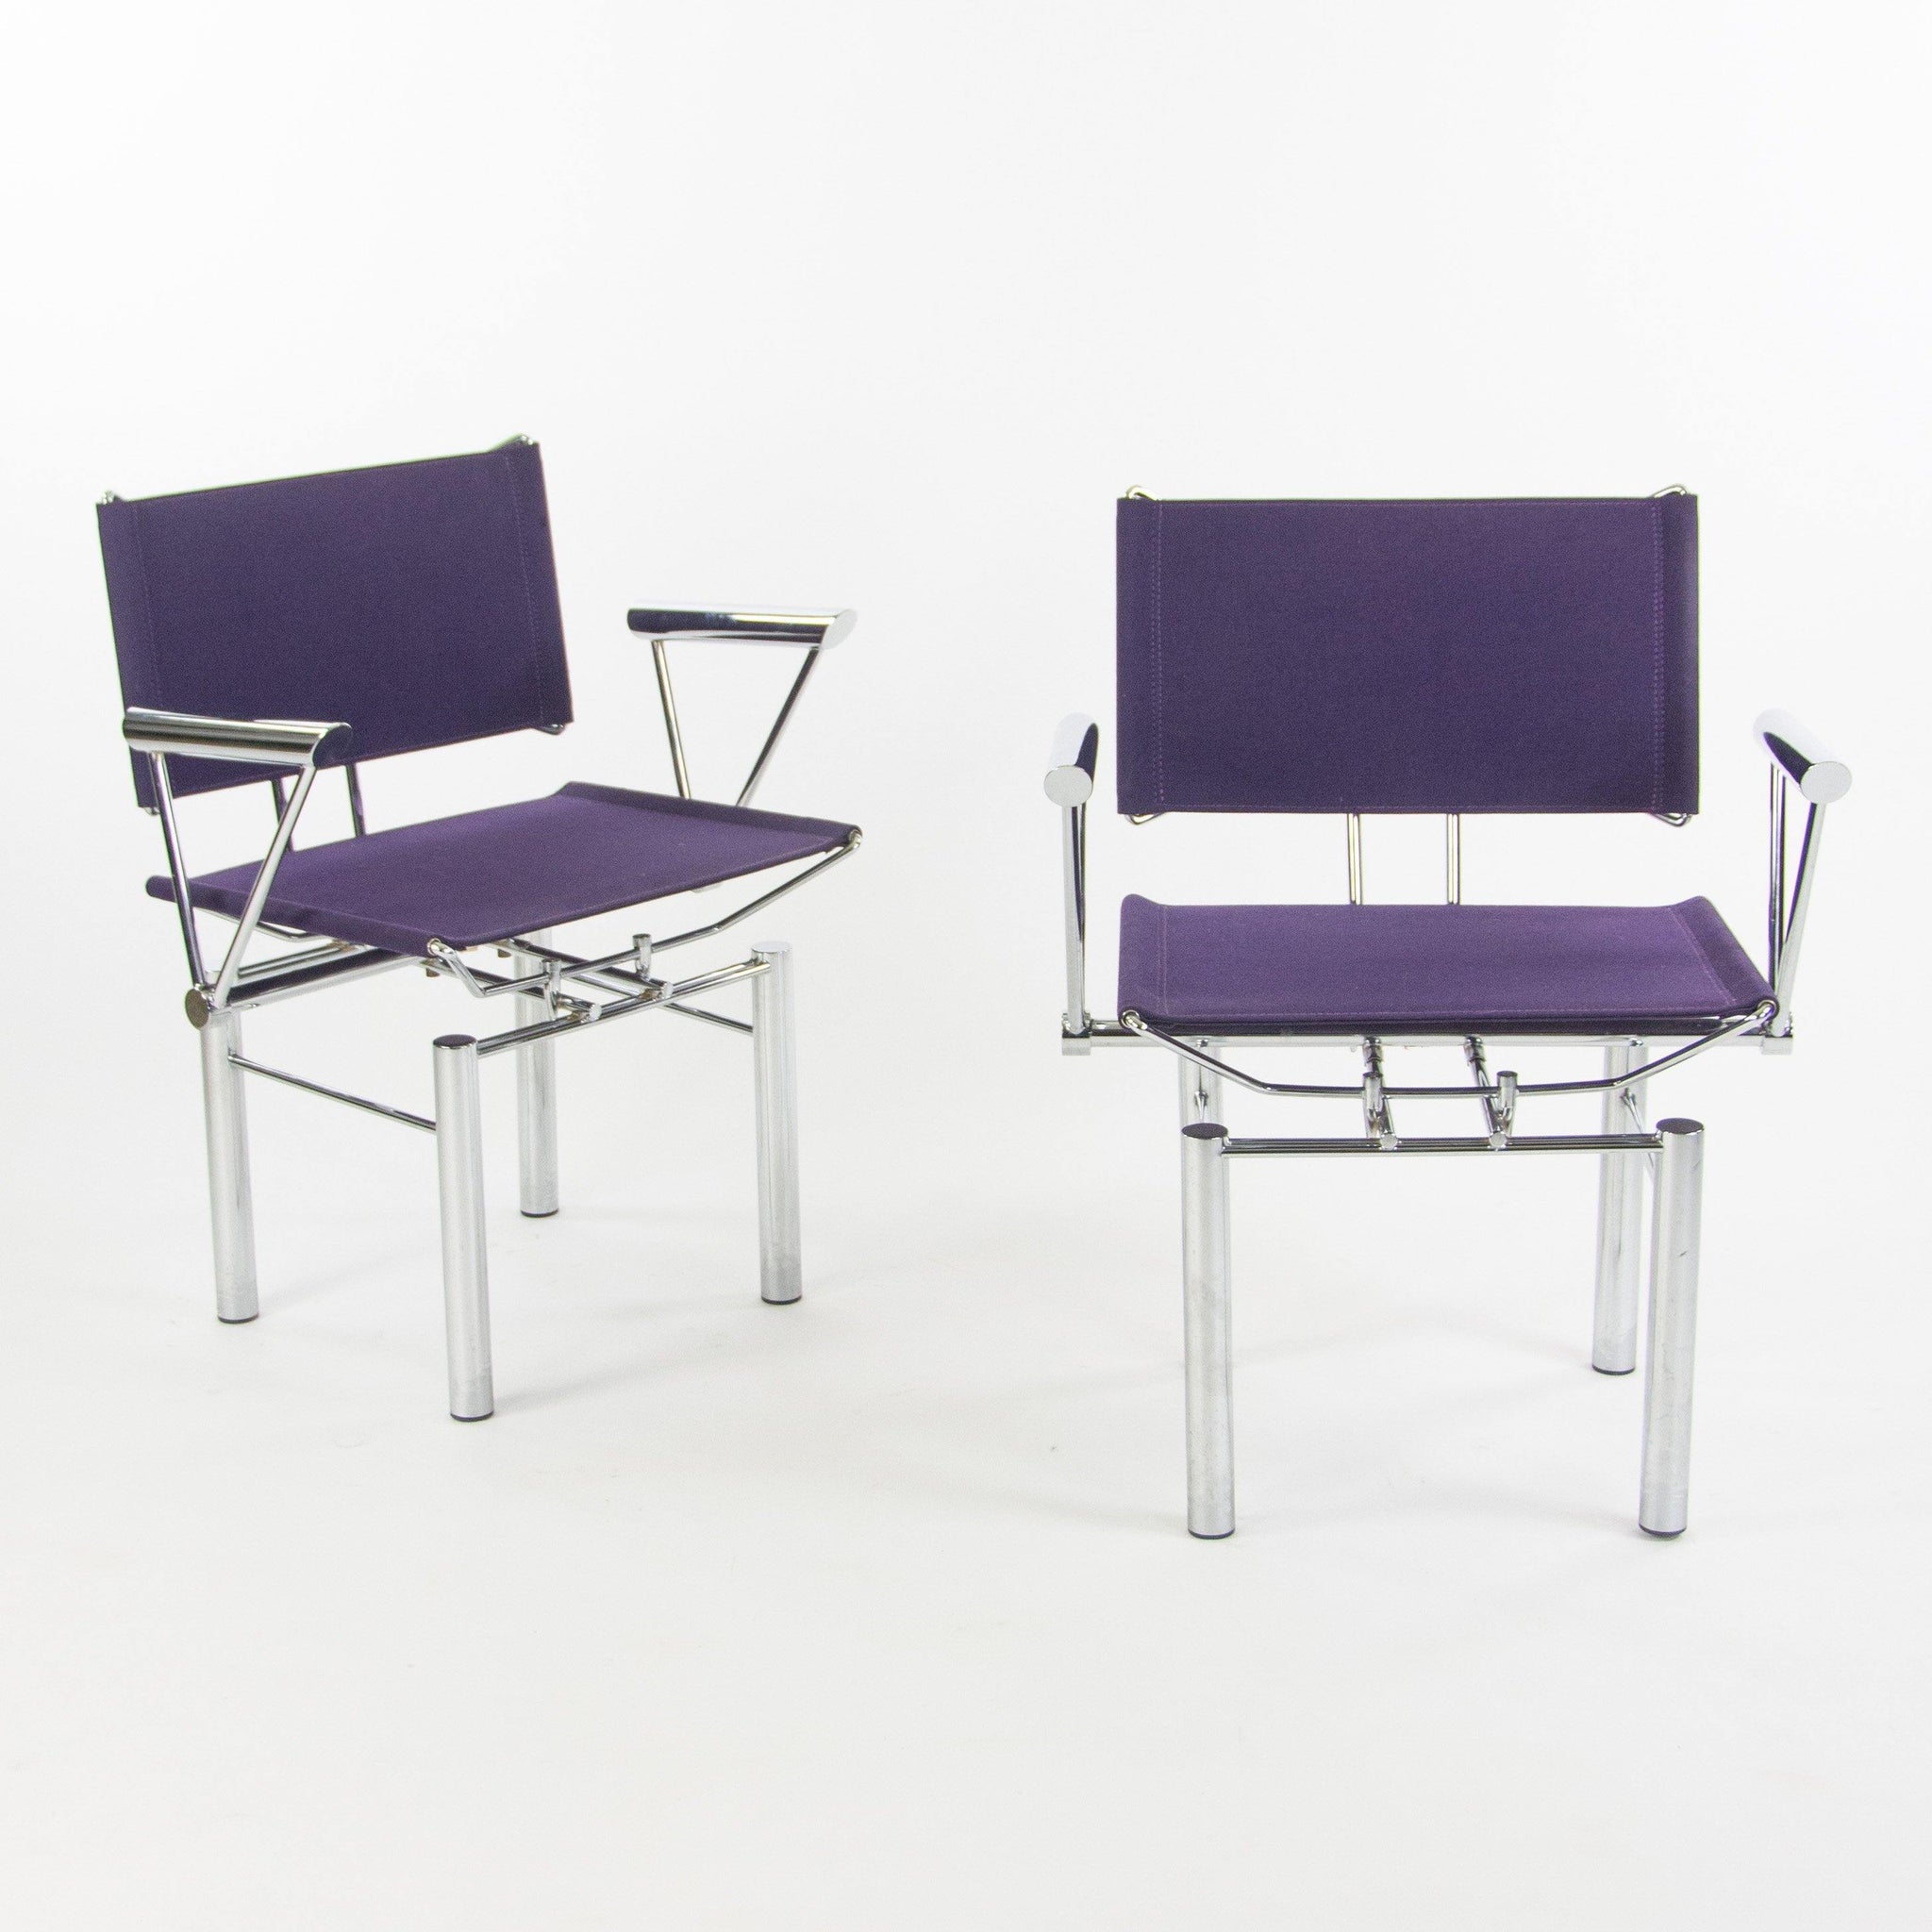 1980s Hans Ullrich Bitsch for KuschandCo Dining Side Chairs Purple Fabric Pair - Rarify Inc.